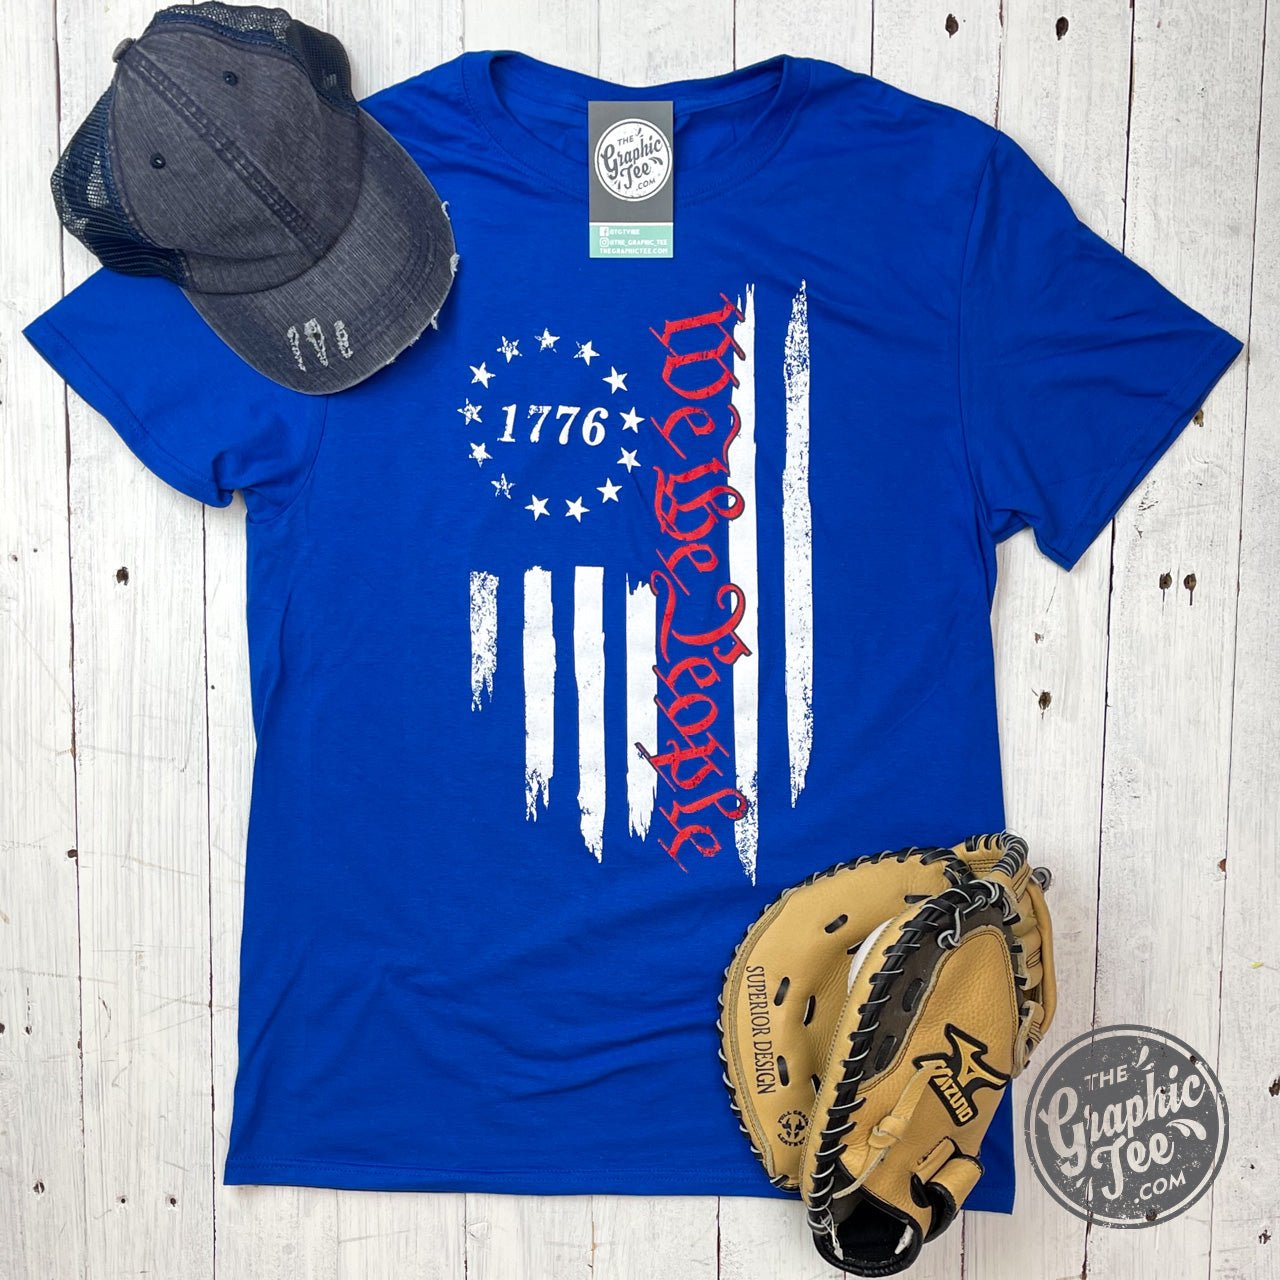 We The People Adult Short Sleeve Tee - The Graphic Tee